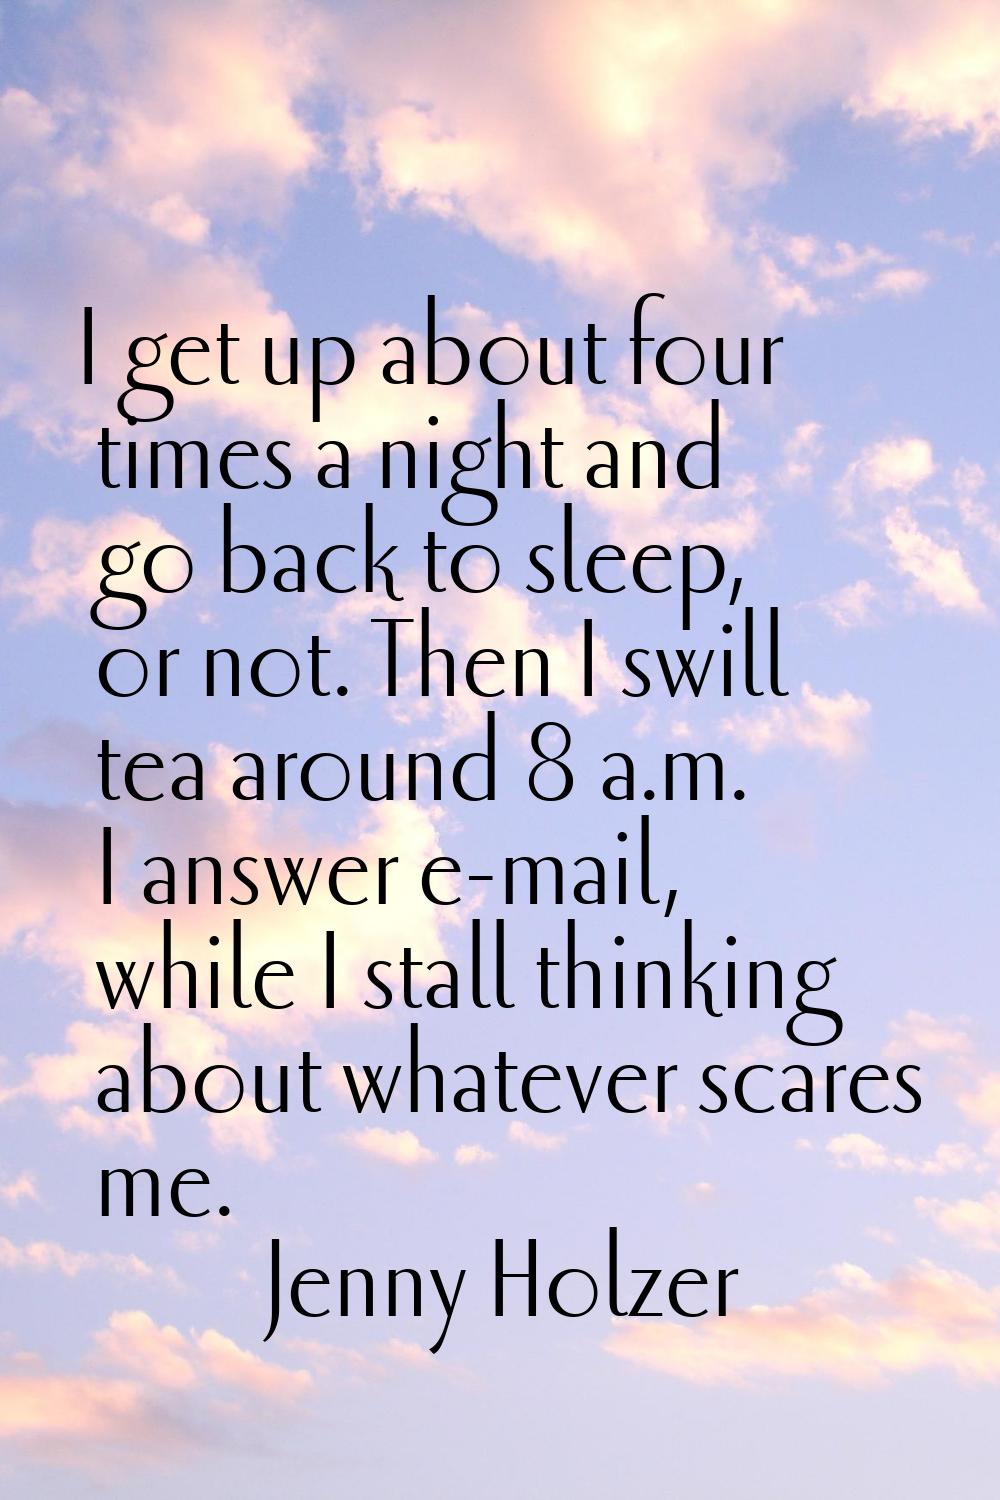 I get up about four times a night and go back to sleep, or not. Then I swill tea around 8 a.m. I an